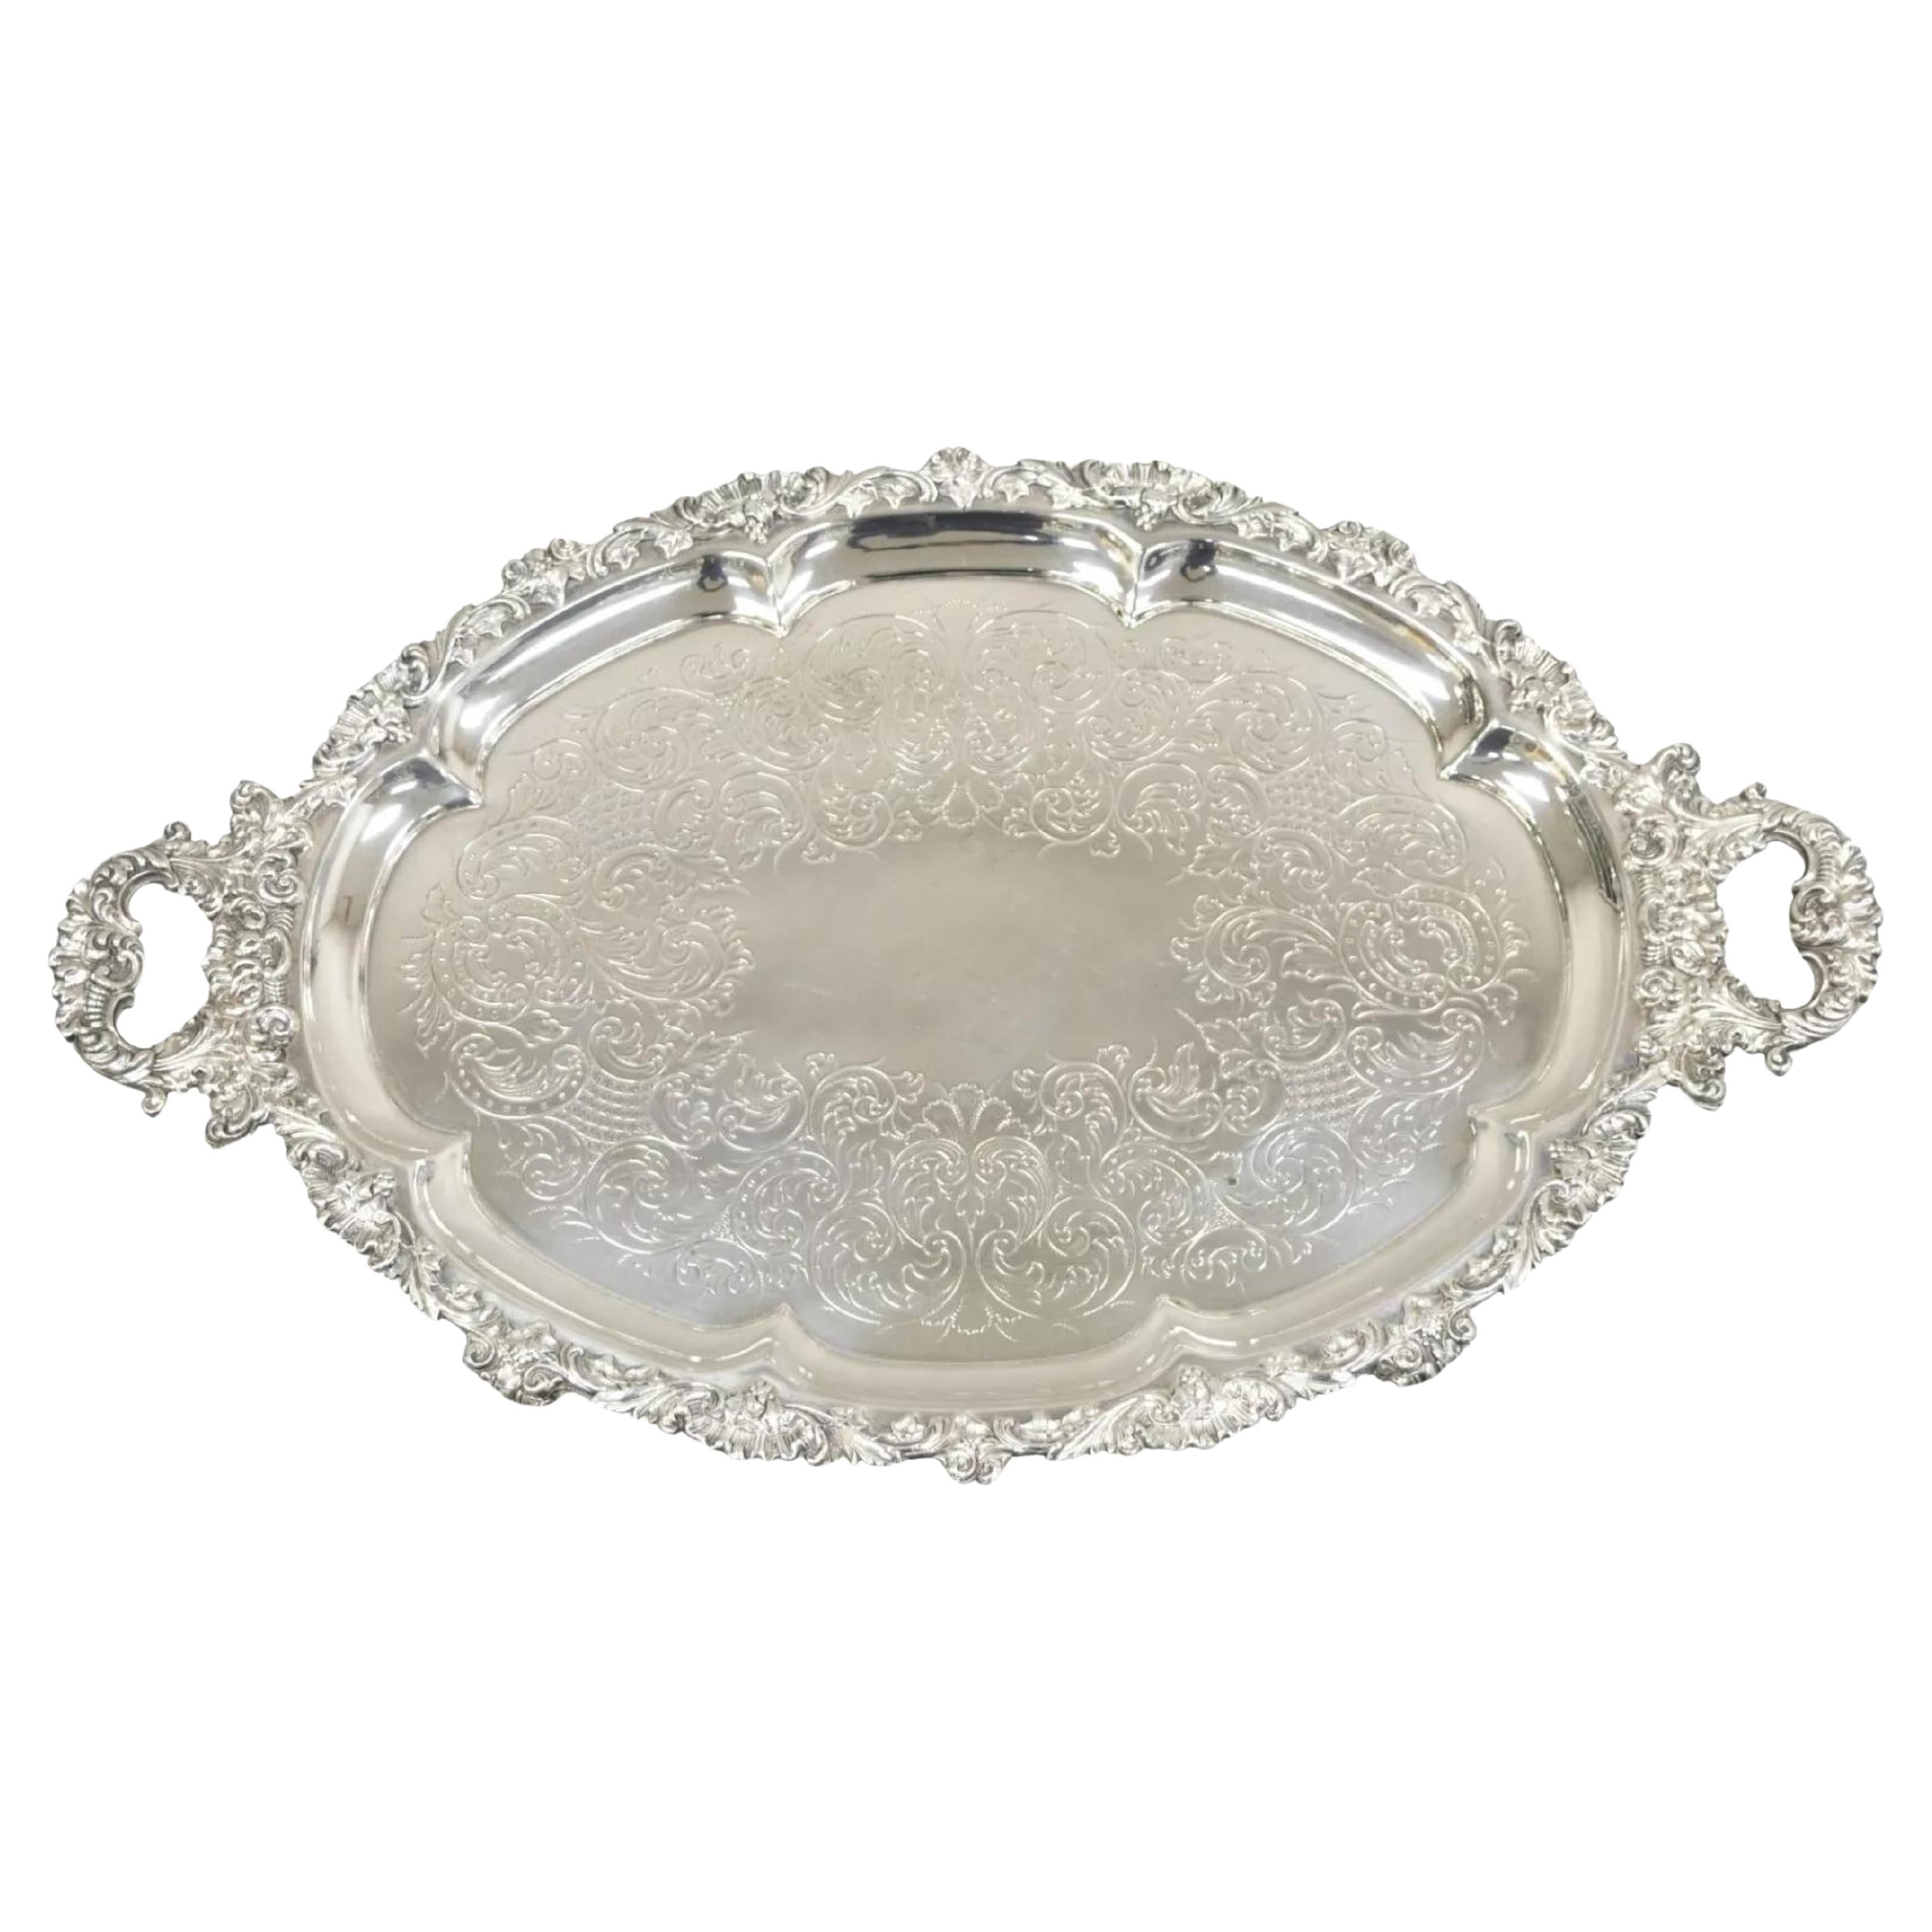 Antique Victorian English Sheffield Ornate Oval Serving Platter Tray For Sale